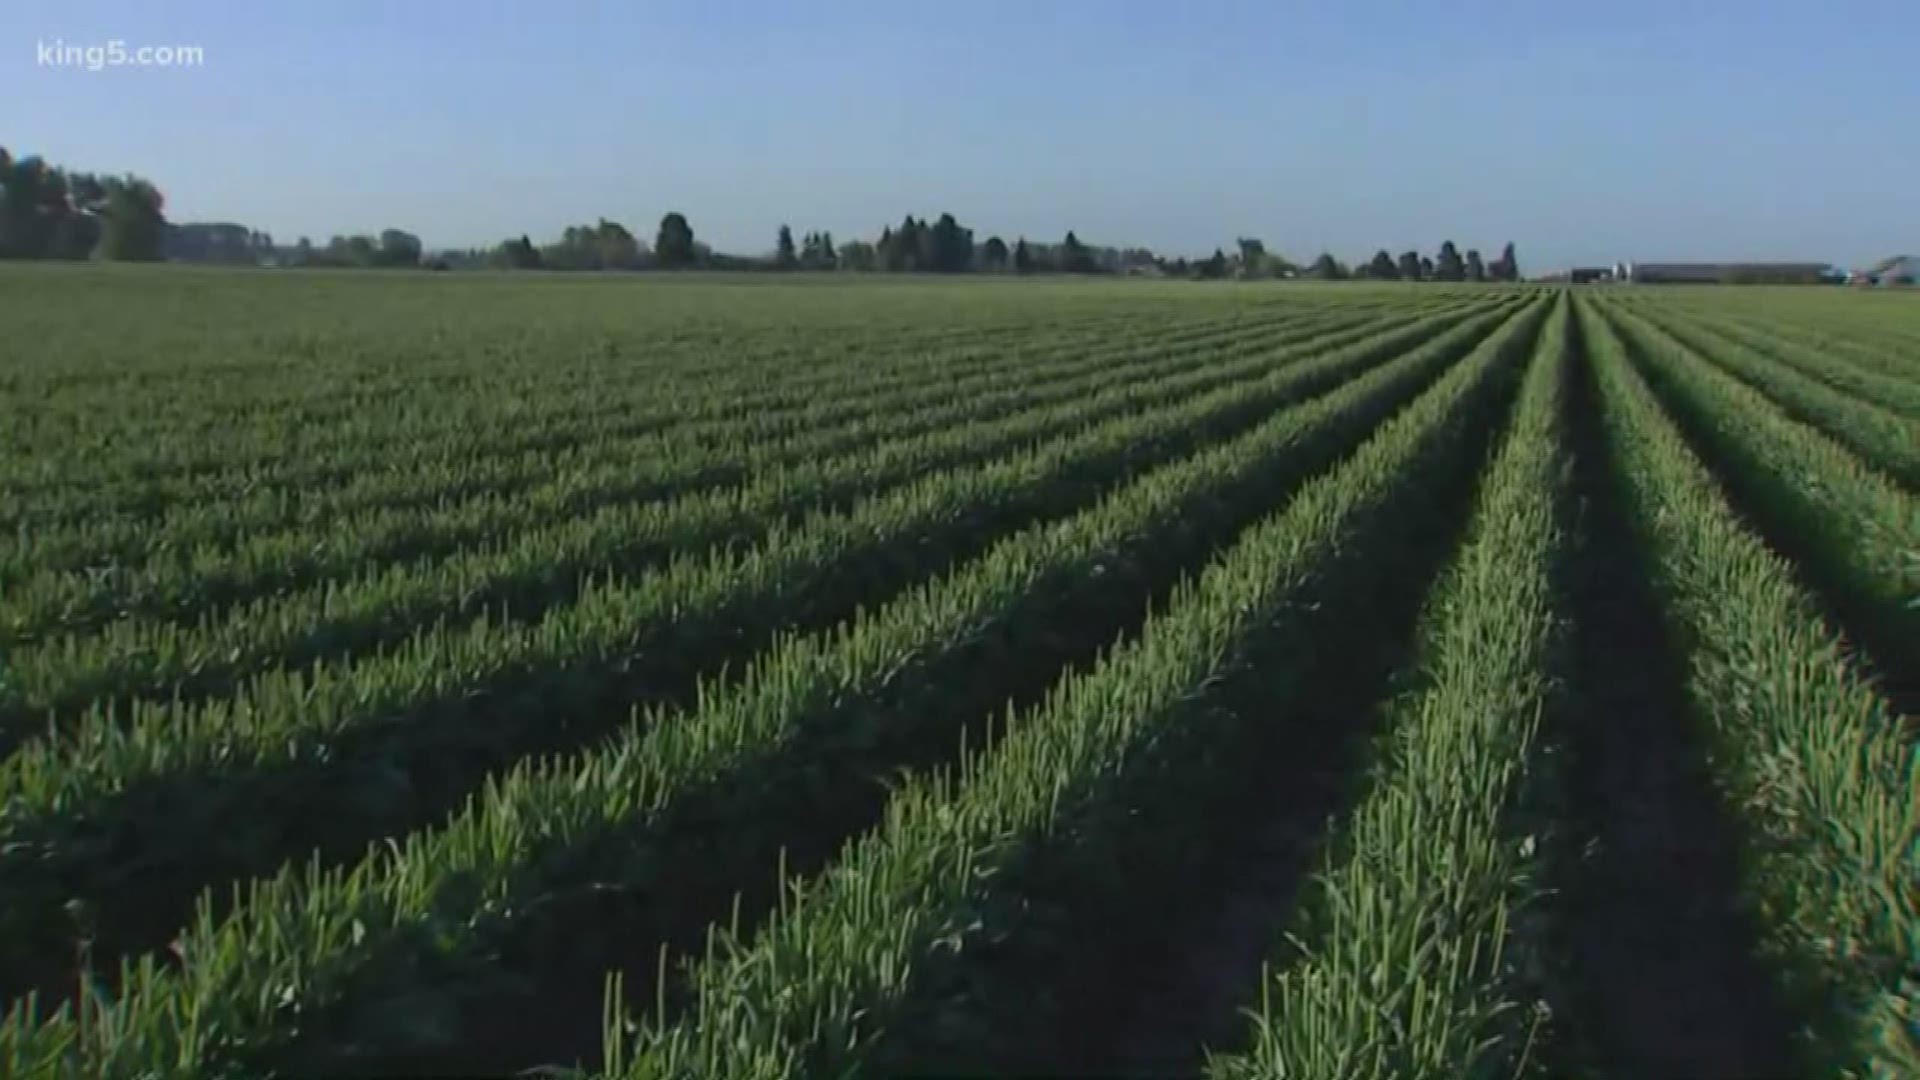 Now that the annual Tulip festival in Skagit County is over, what happens to the tulips? And how about the massive gardens? KING 5's Jordan Wilkerson went to the fields for the answer.